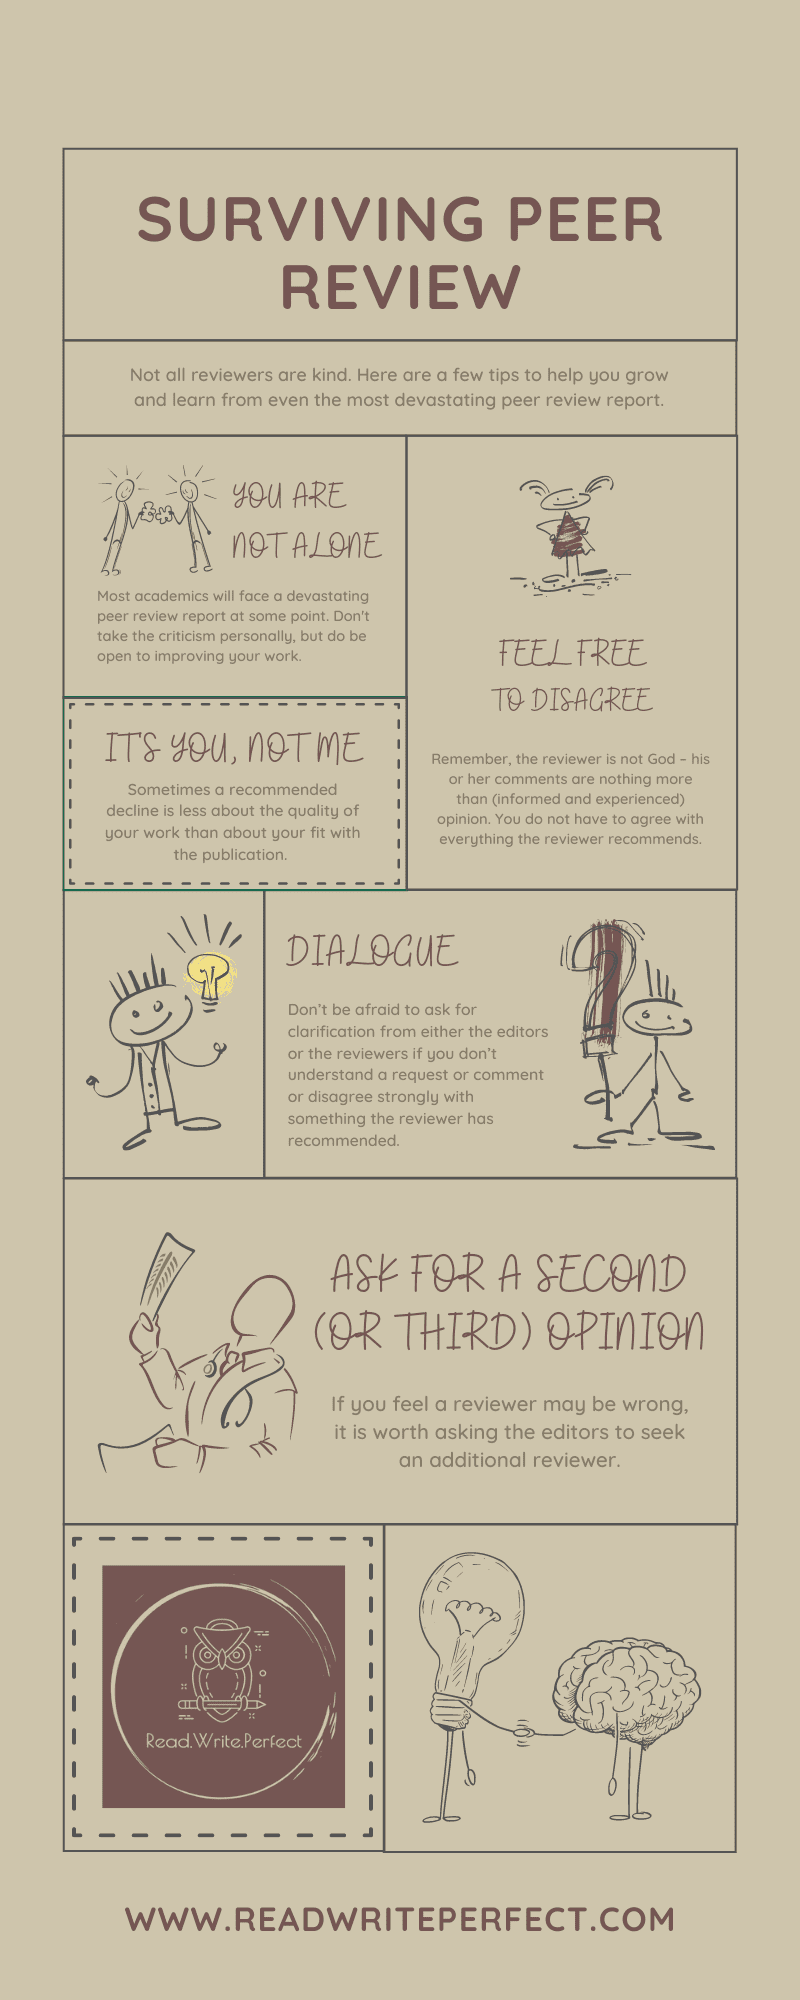 Peer Review Infographic